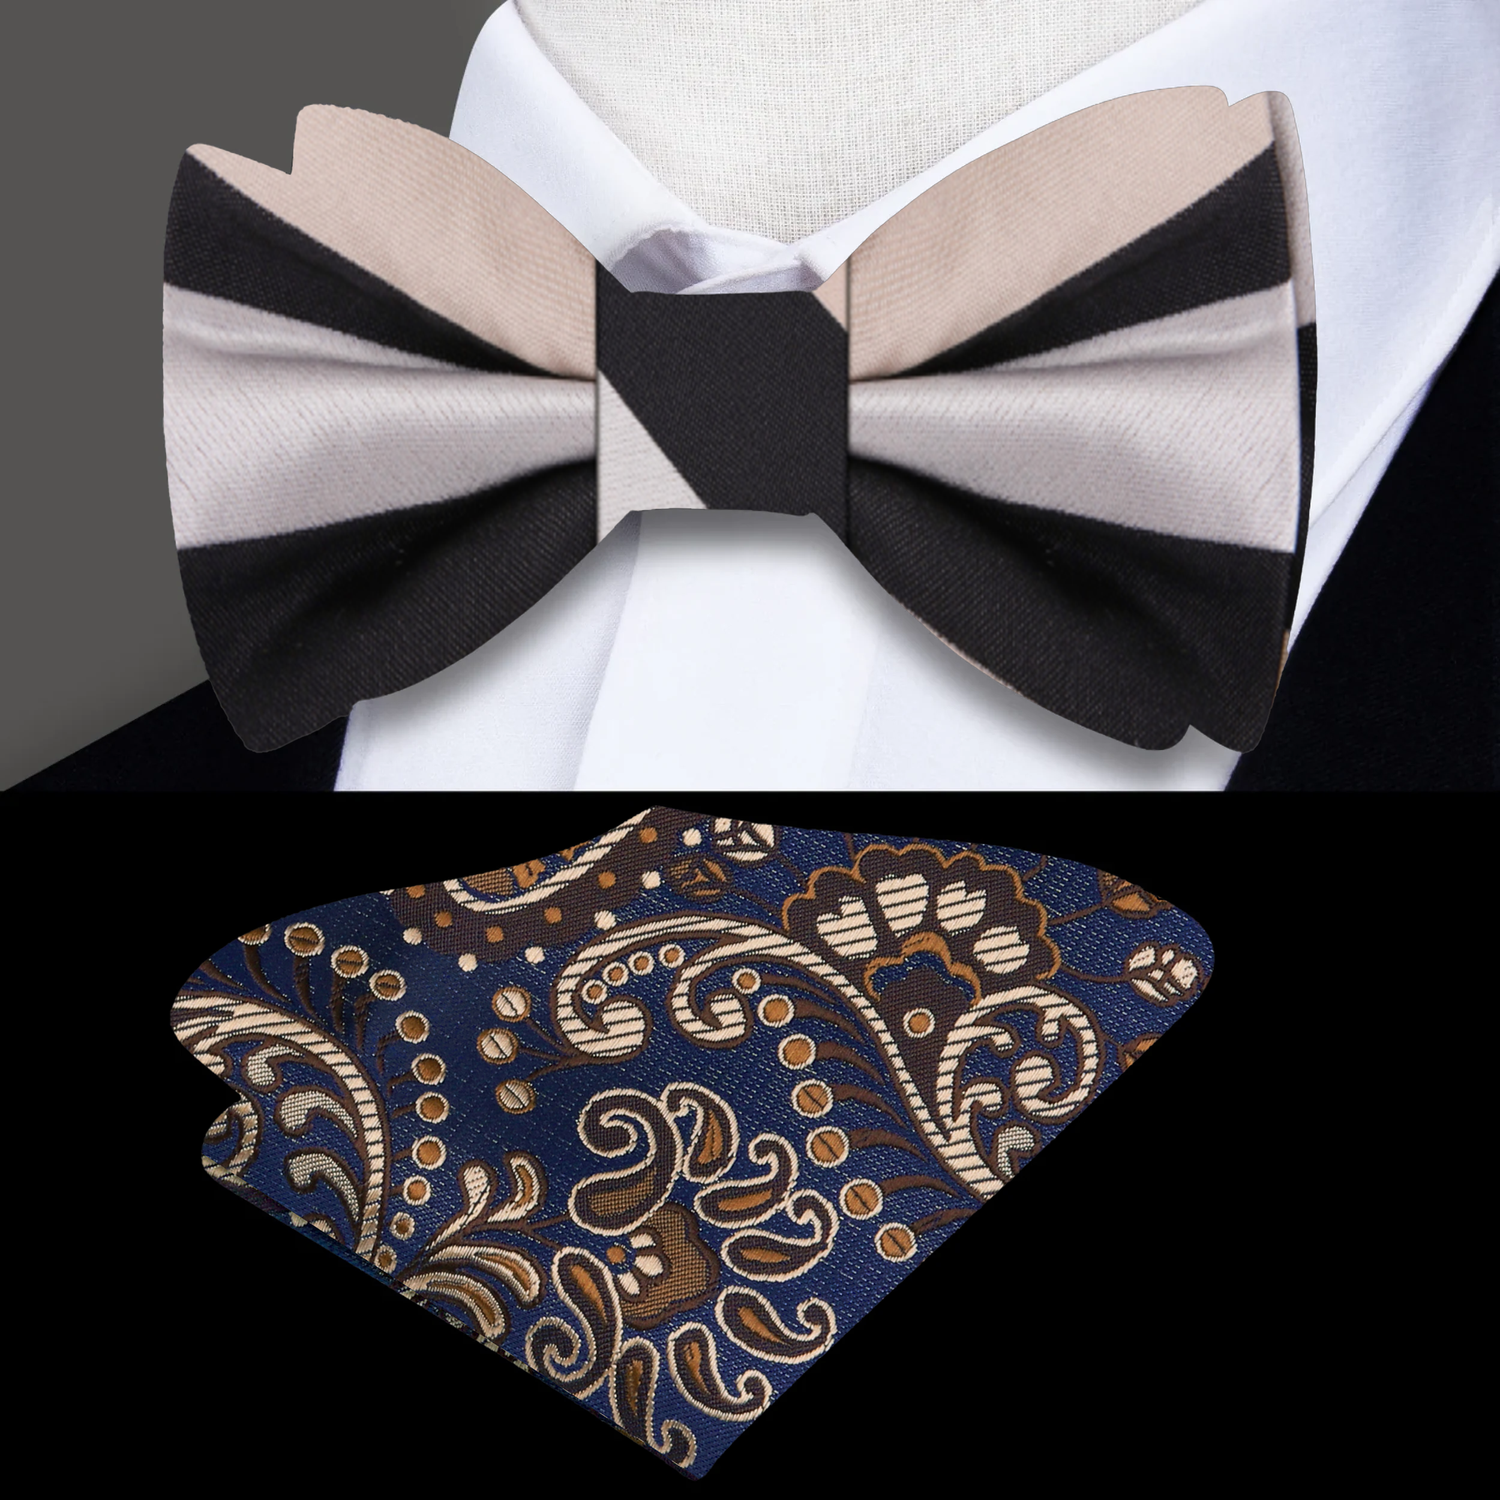 Shades of Brown Lethal Stripe Bow Tie and Accenting Square